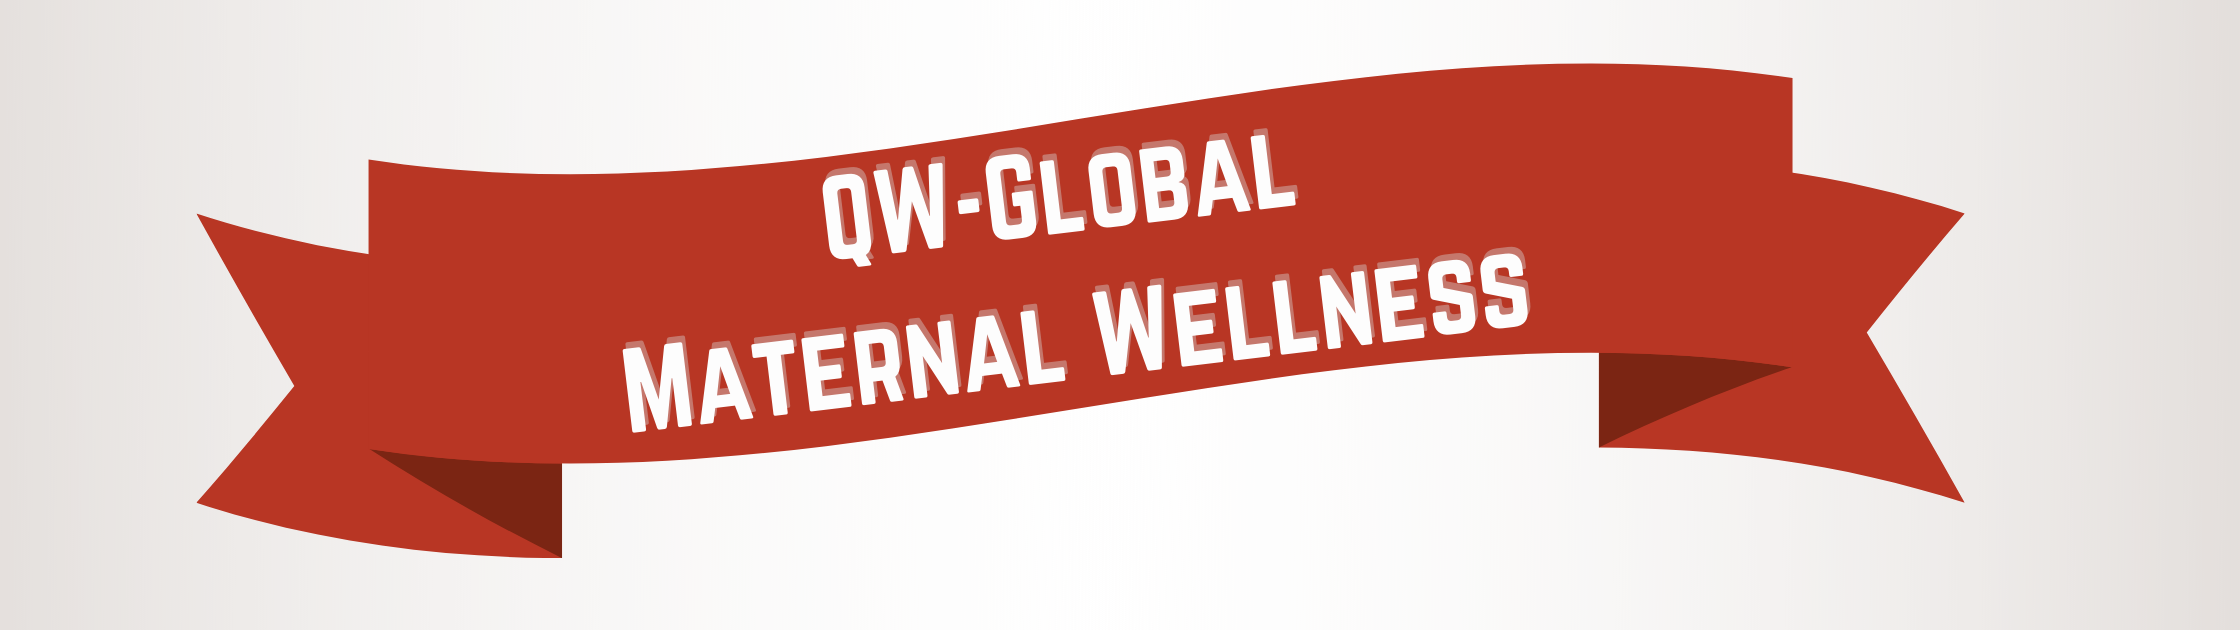 QW-Global Maternal Wellness on red holiday ribbon